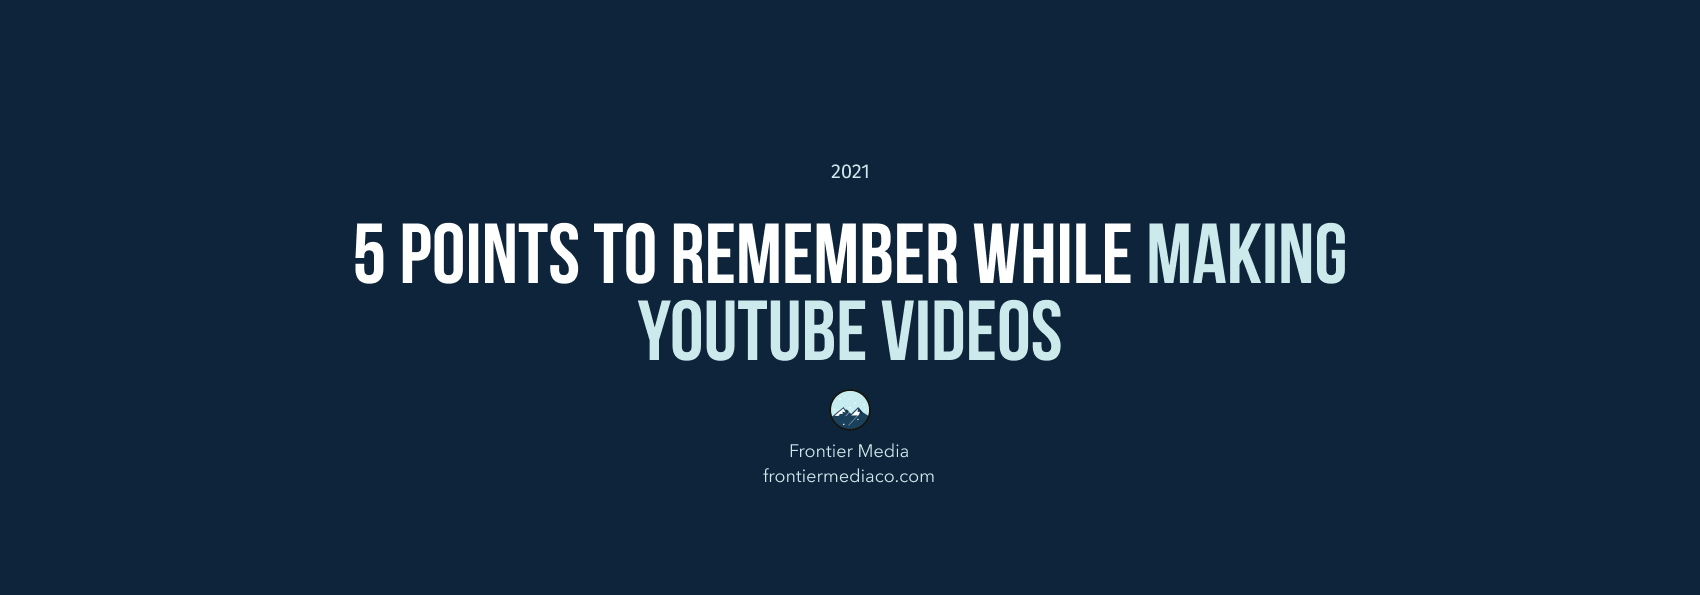 5 Points to Remember While Making YouTube Videos